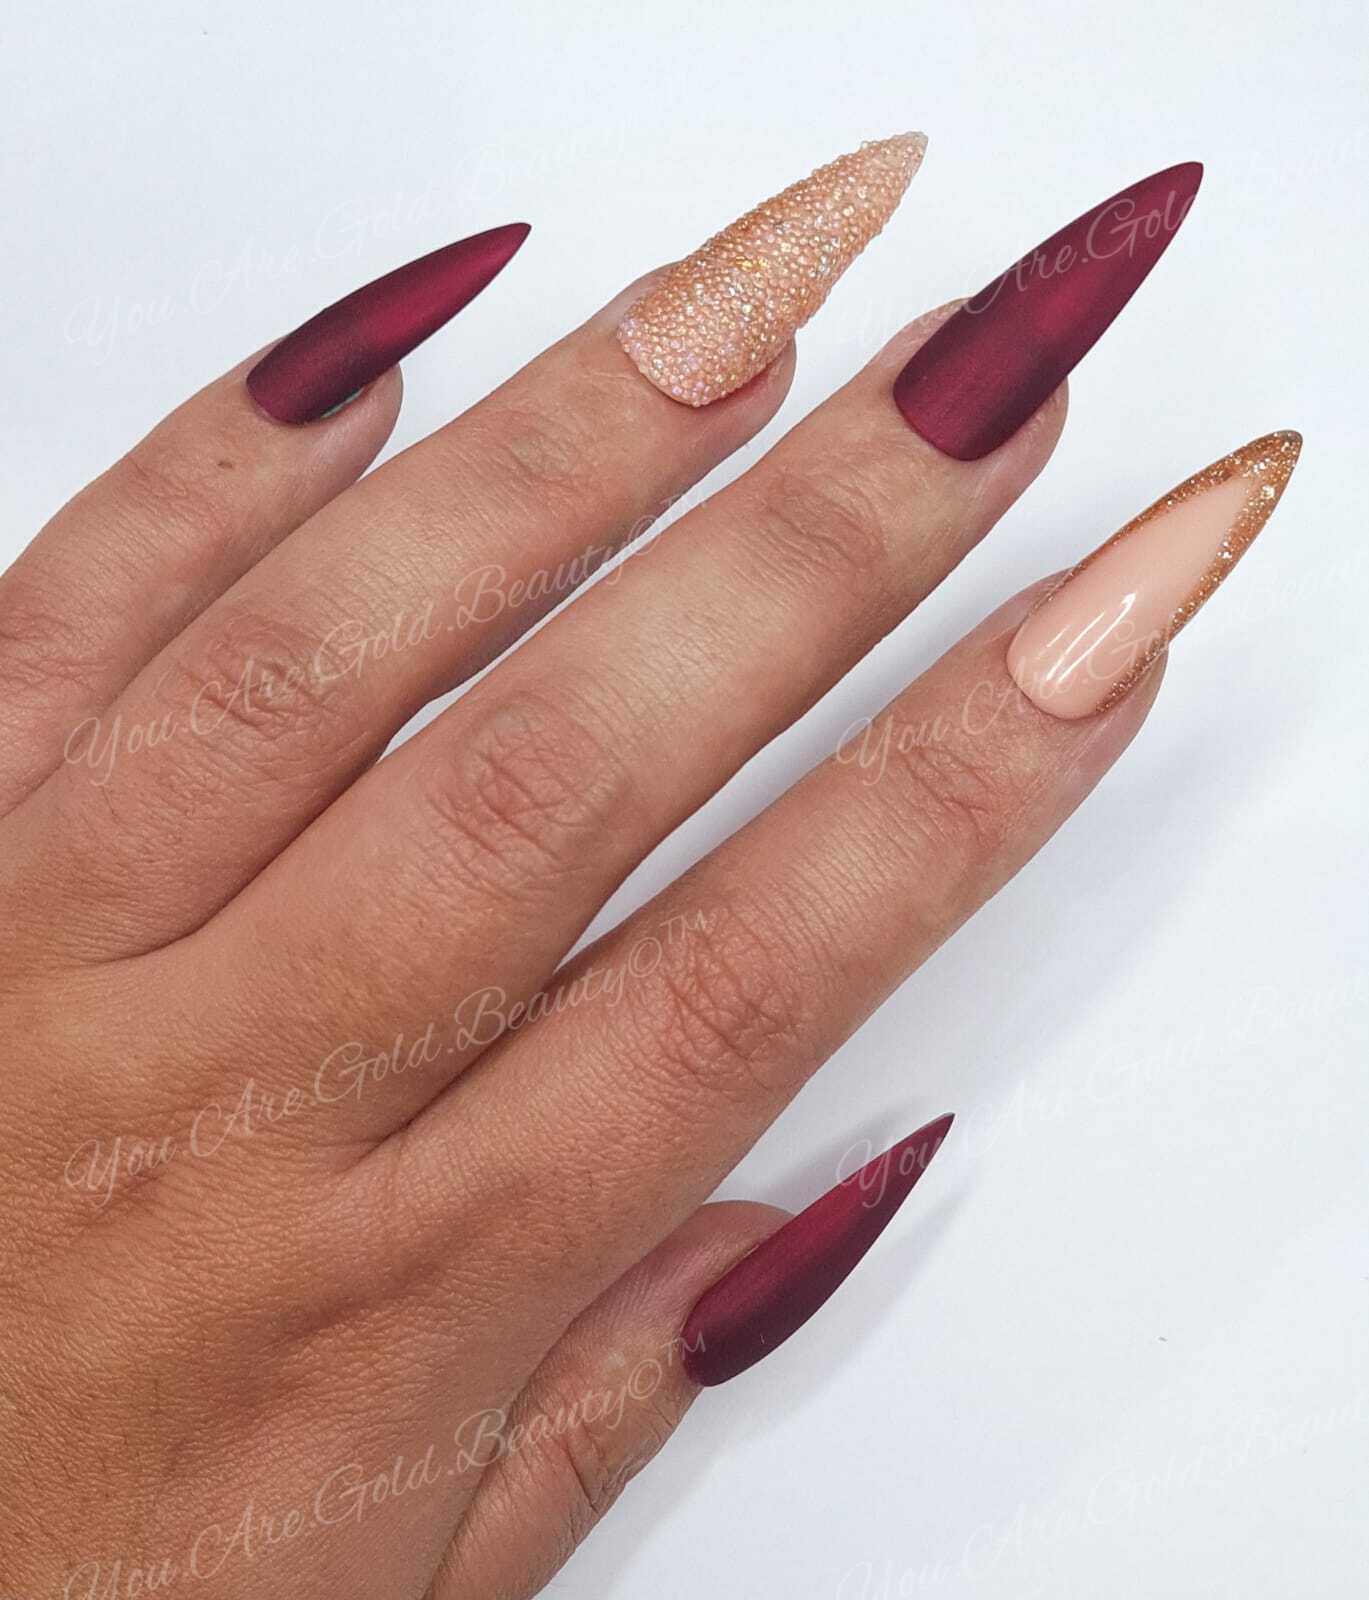 Wine red Stiletto Shaped Press On Nails UK, Red nails, red stiletto nails, stiletto nails, stiletto shaped nails, press on nails uk, rhinestone nails, wine red nails, gold and red nails, gold and red nails designs, matte red nails,